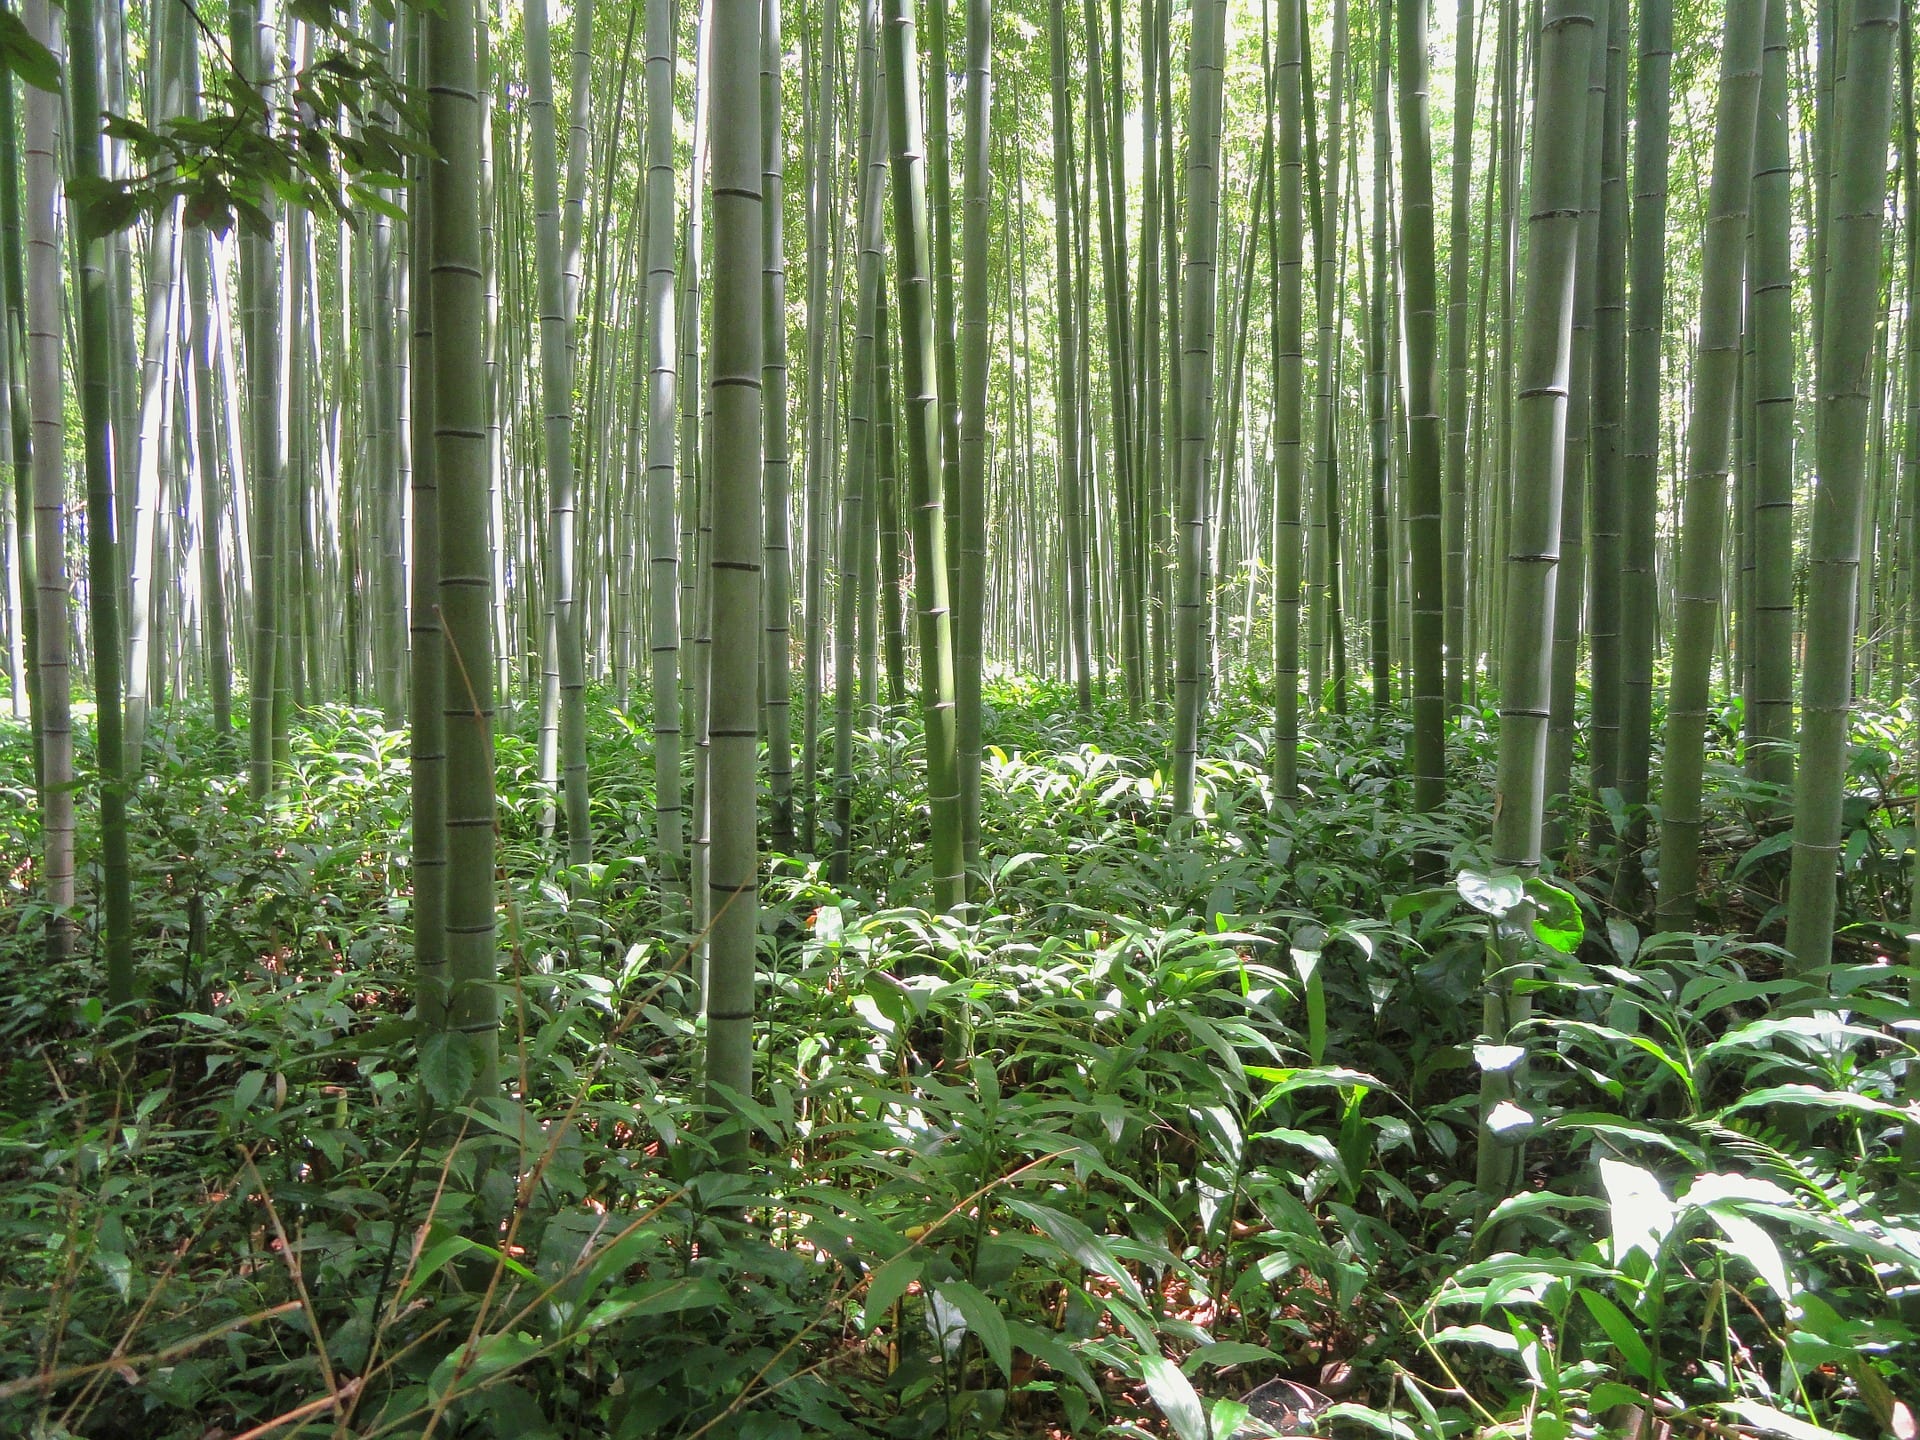 Bamboo growing in native Japan